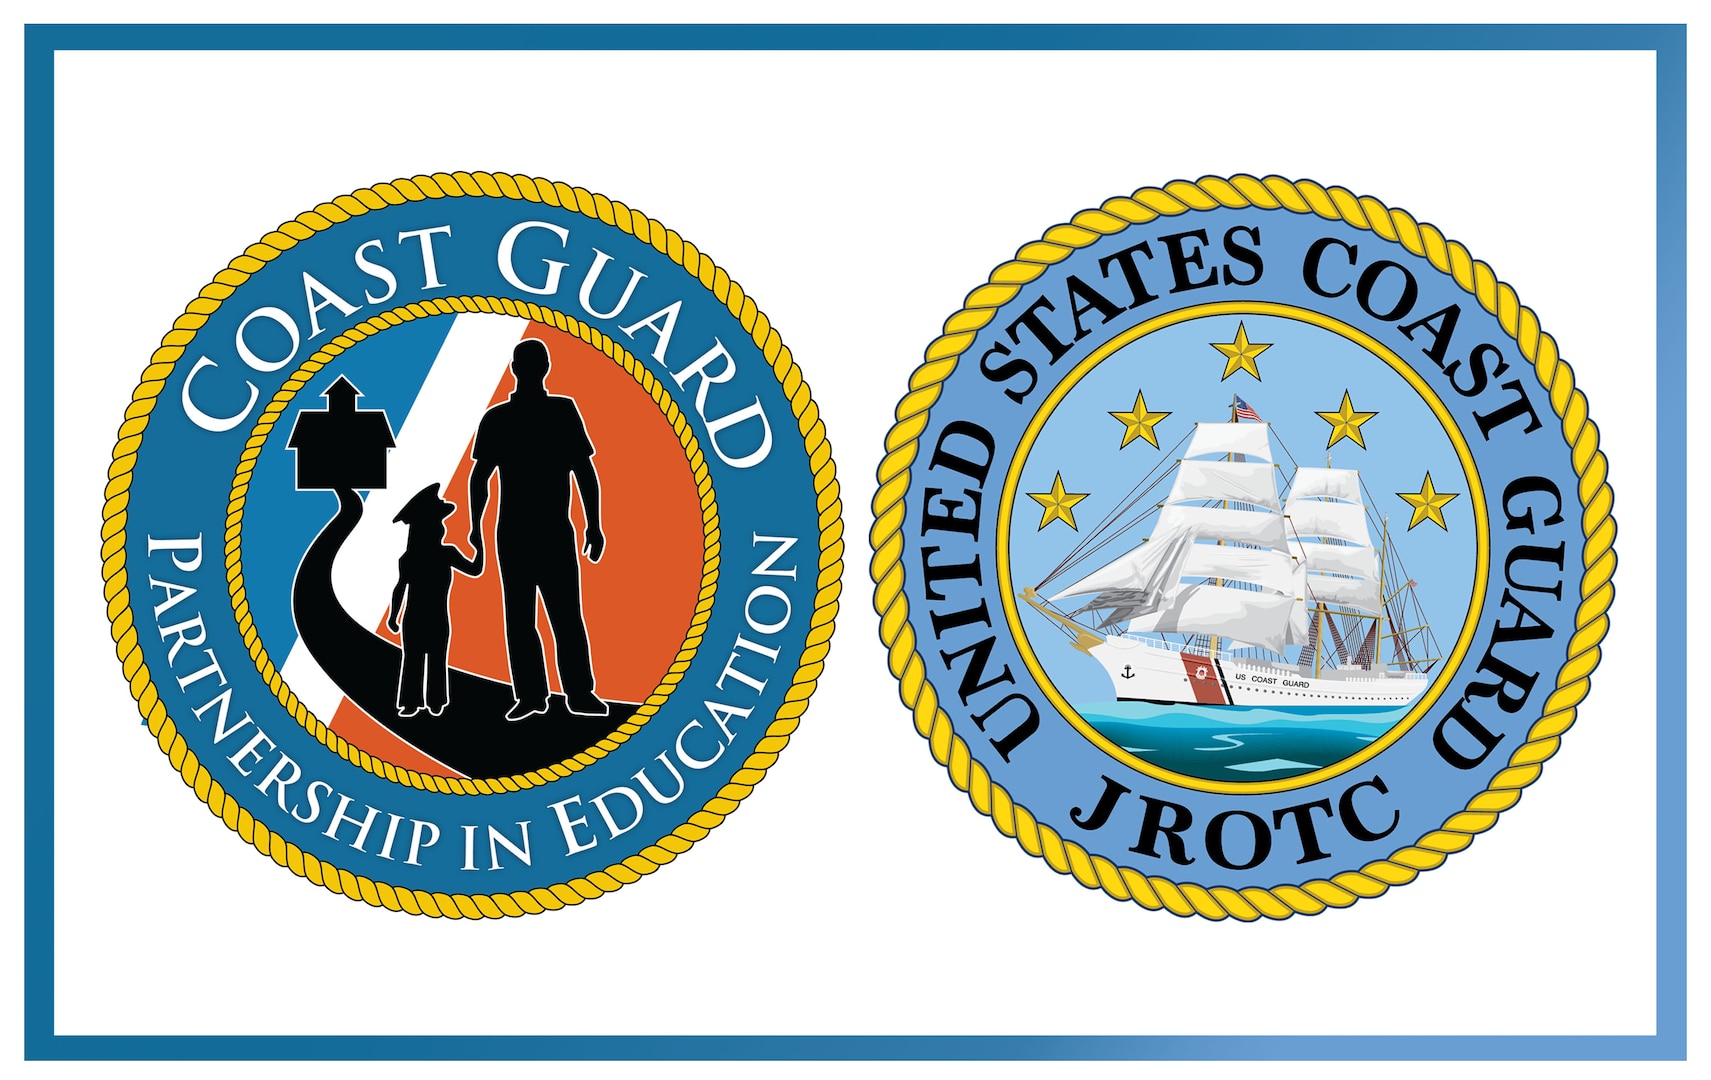 Partners In Education and Coast Guard Junior Reserve Officer Training Corps logos.